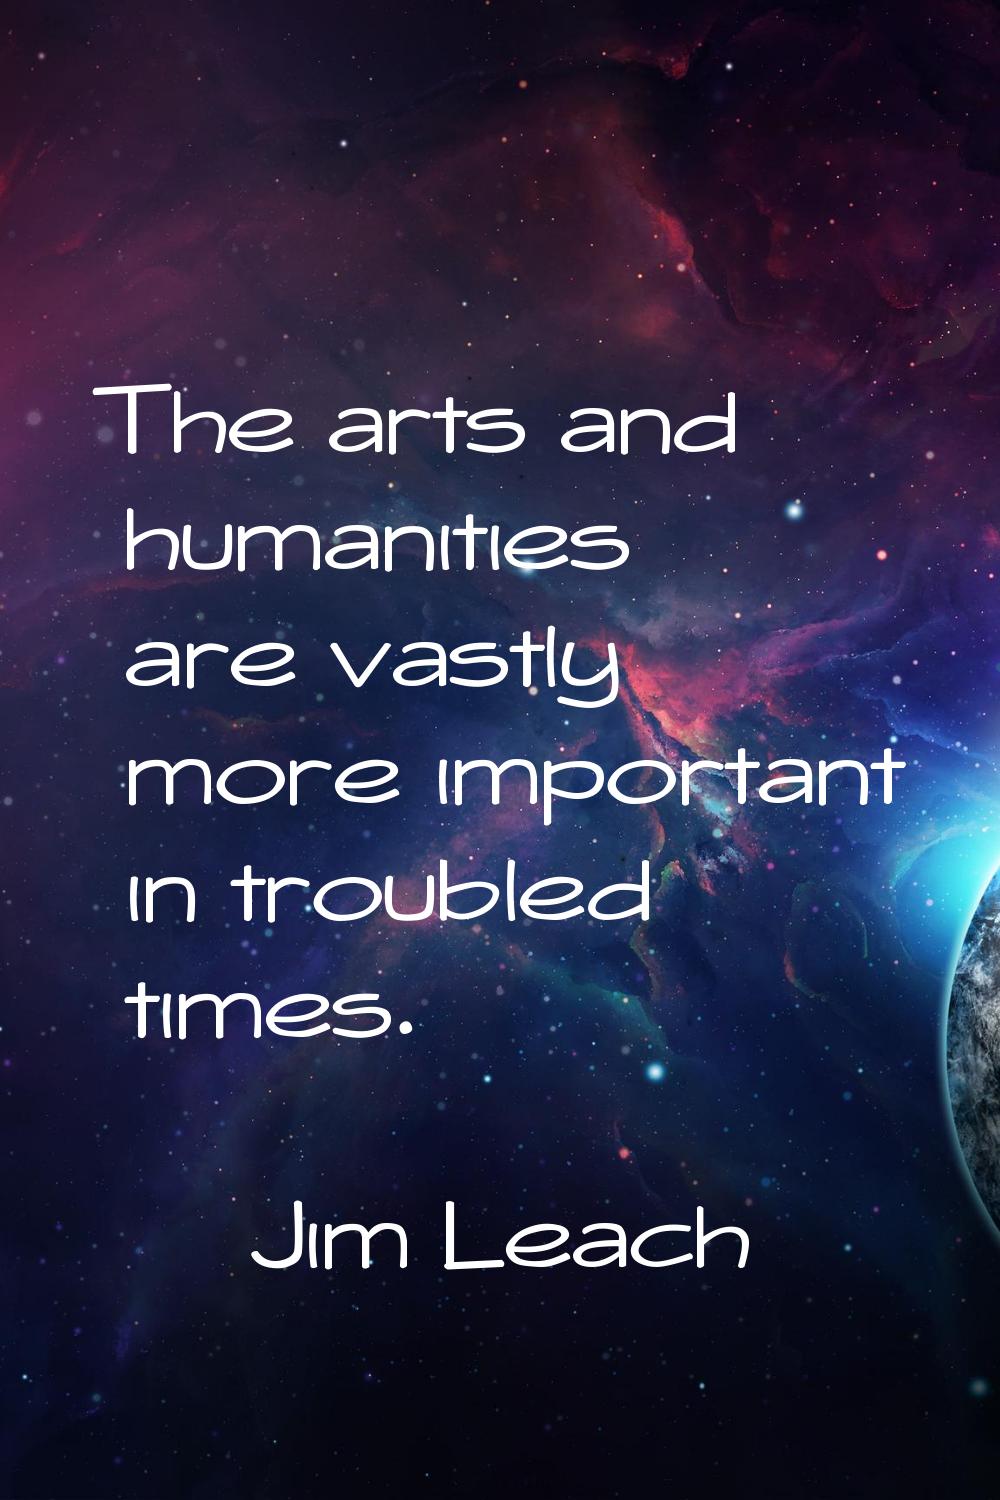 The arts and humanities are vastly more important in troubled times.